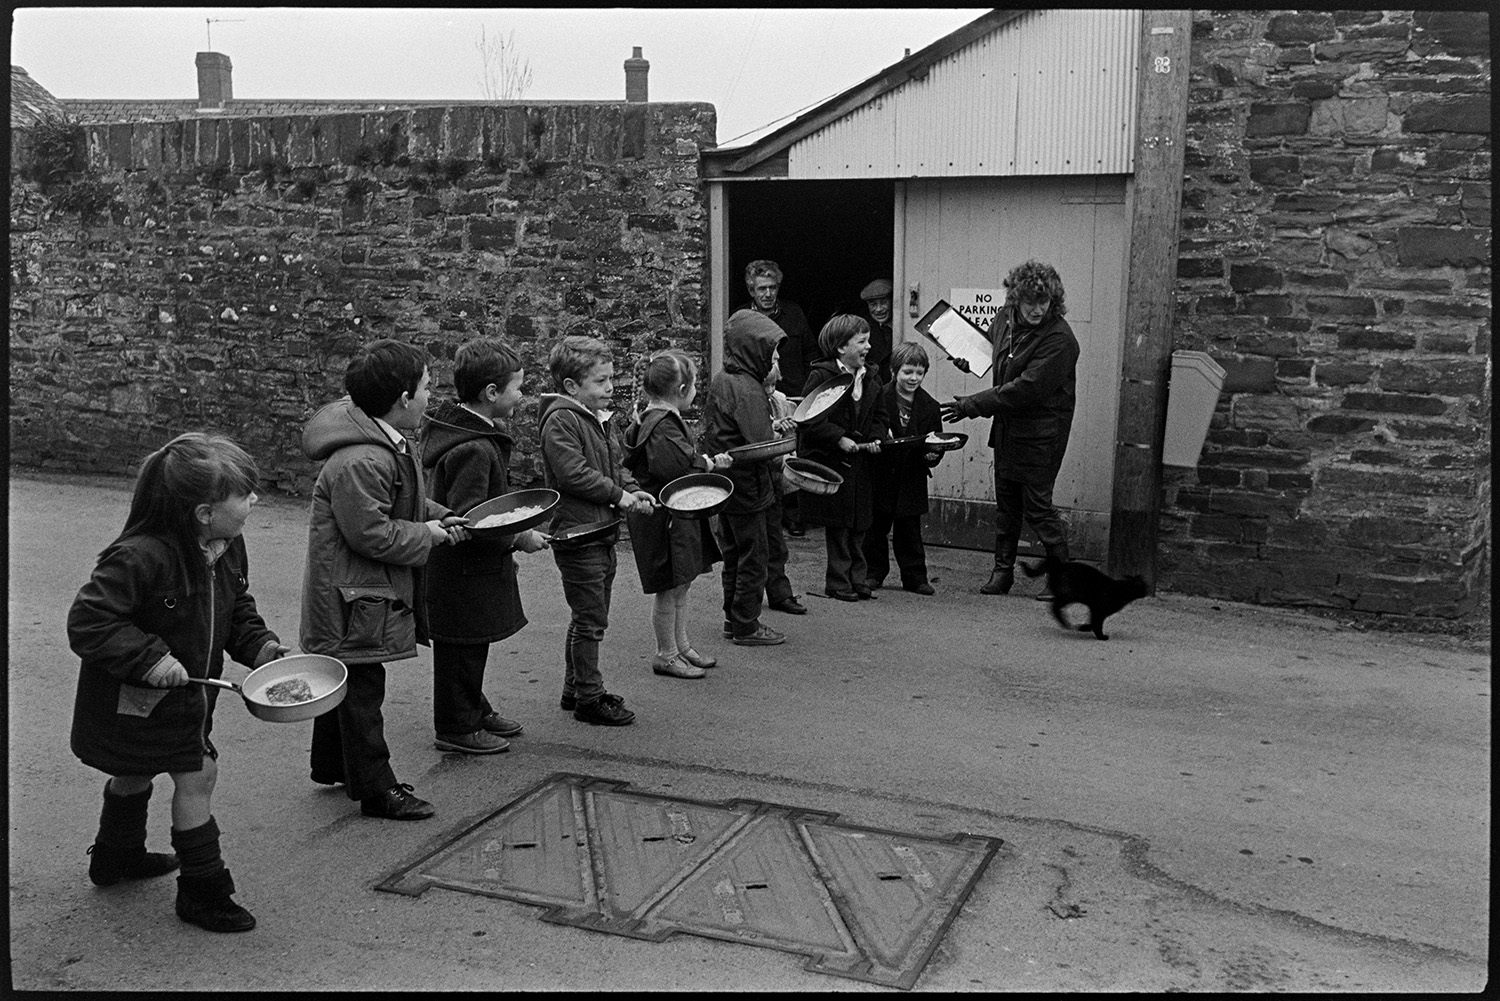 Pancake race in village street, children and spectators. 
[Children lined up holding frying pans with pancakes for a pancake race in Fore Street, Dolton. A woman holding a clip board is about to start the race as a cat is running past her.]